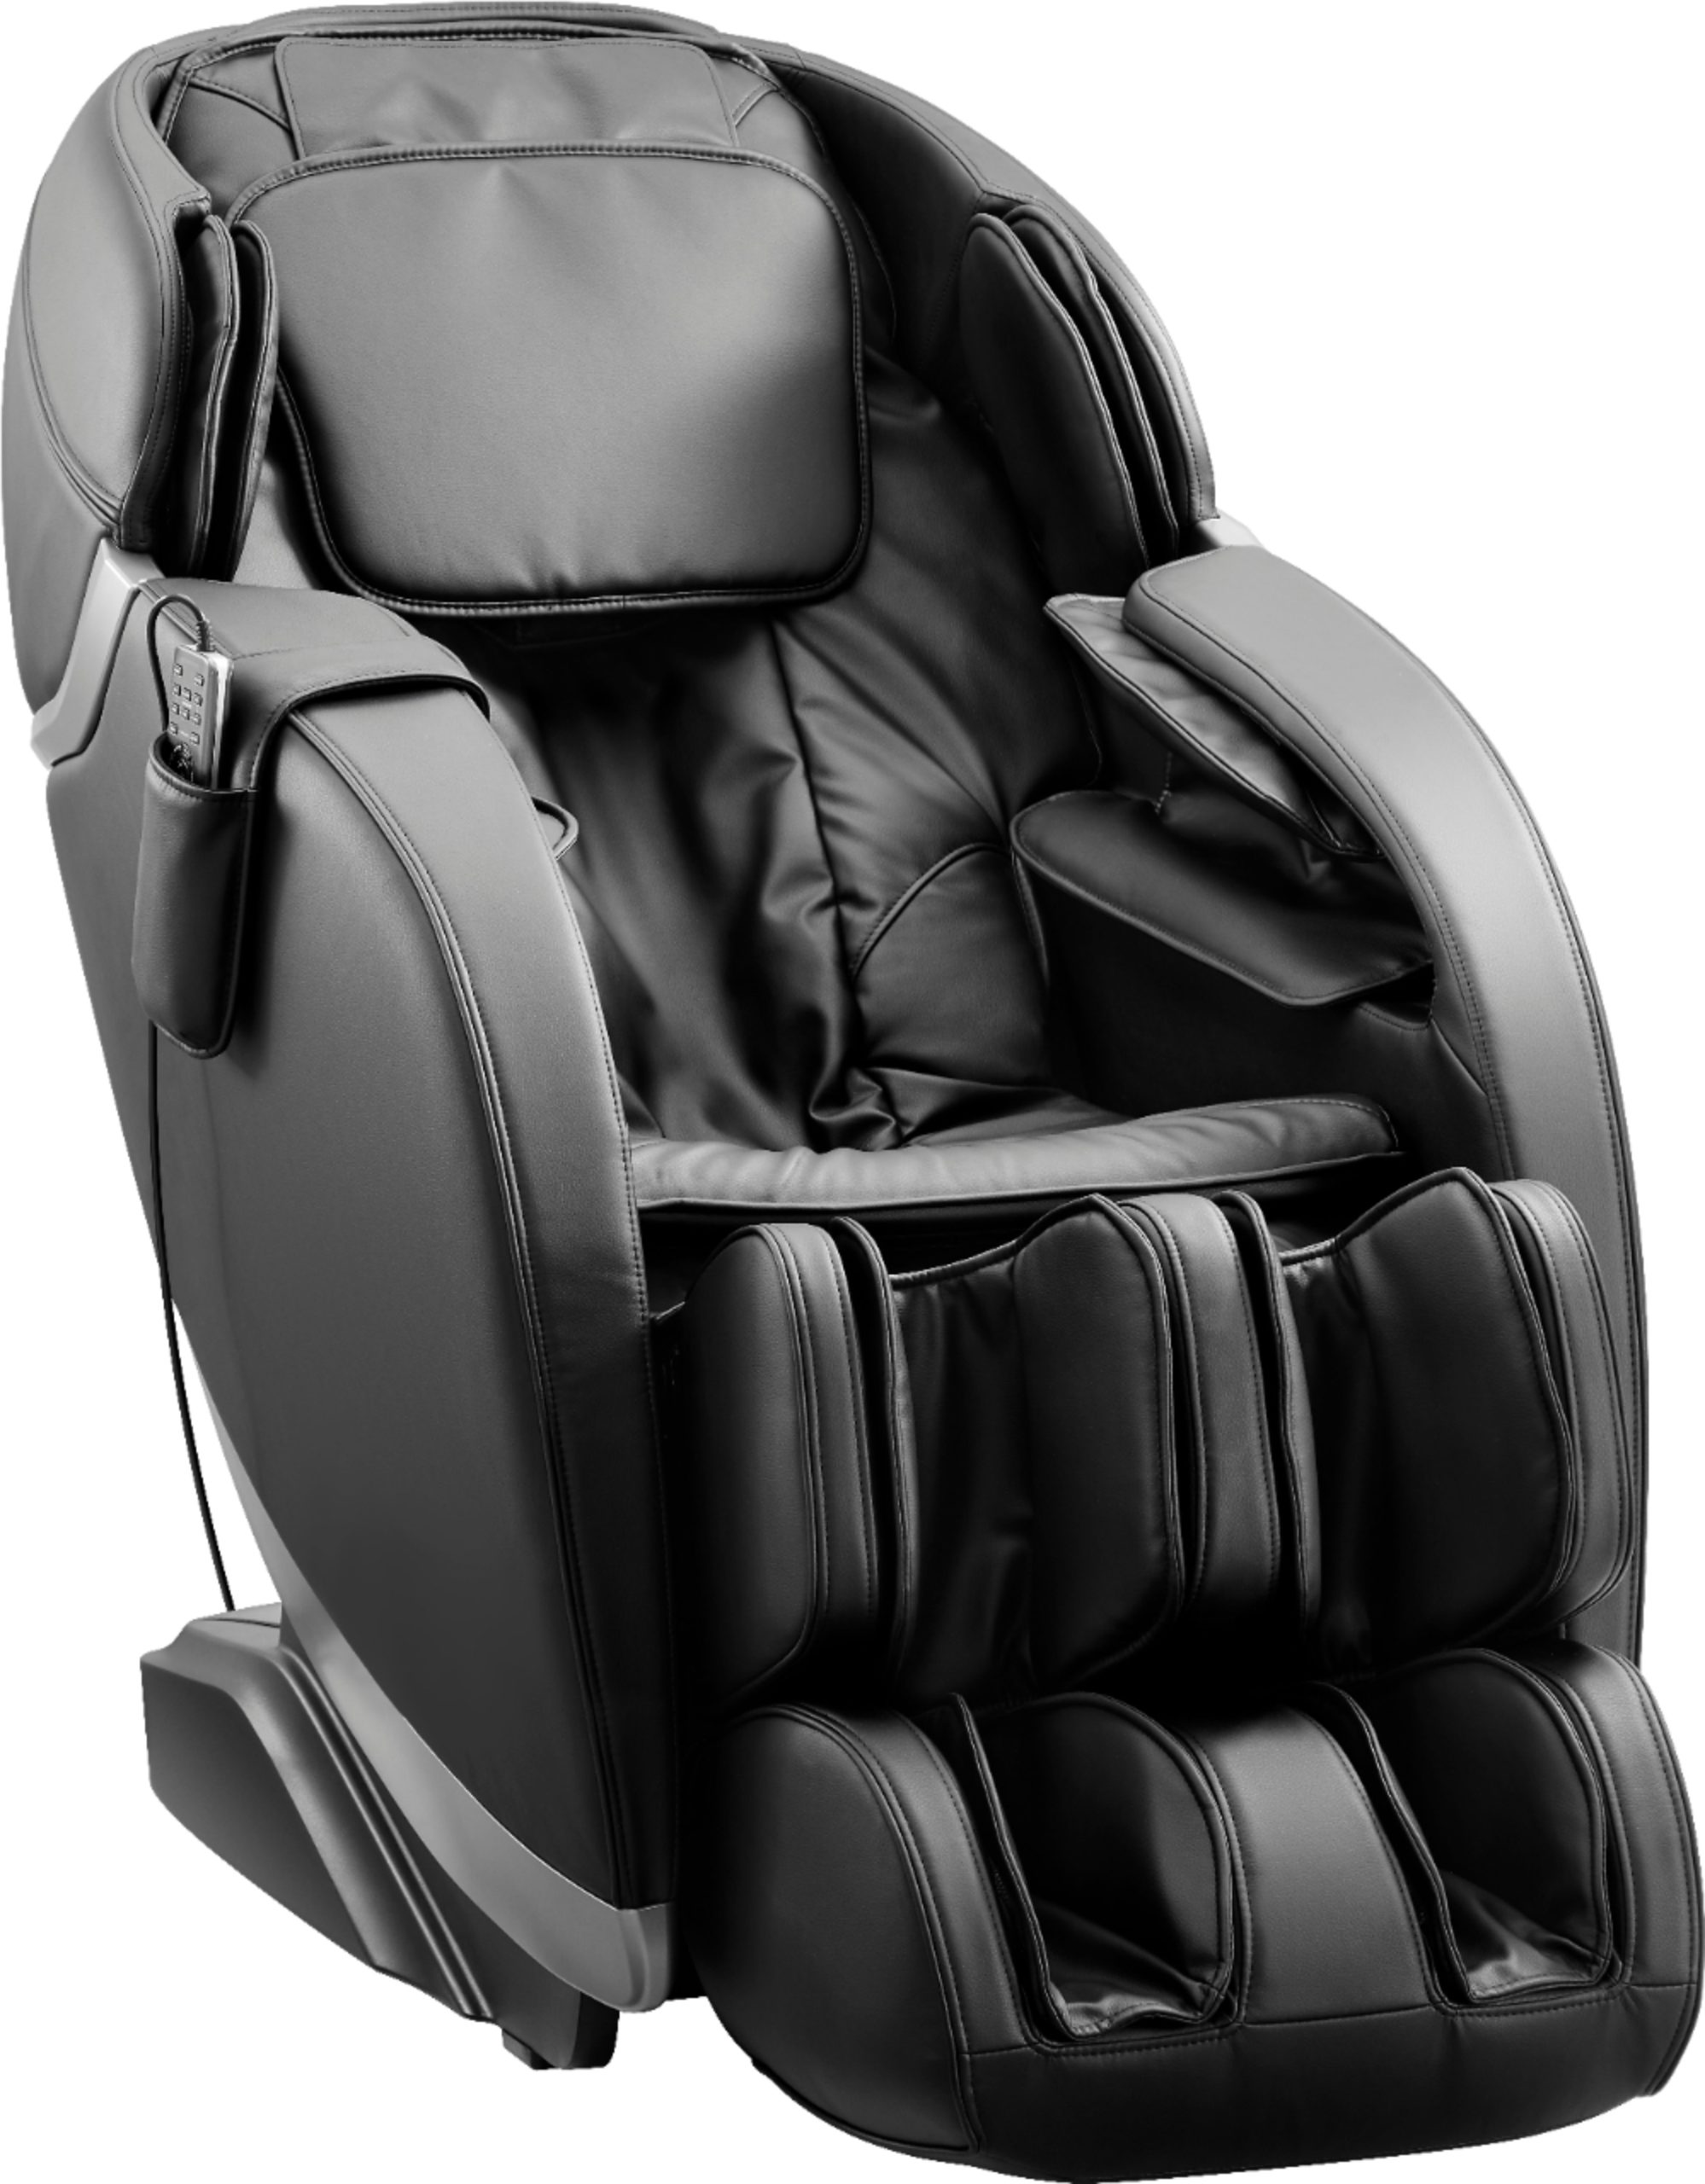 Insignia™ – 2D Zero Gravity Full Body Massage Chair – Black with silver trim – Just $1,749.99 at Best Buy